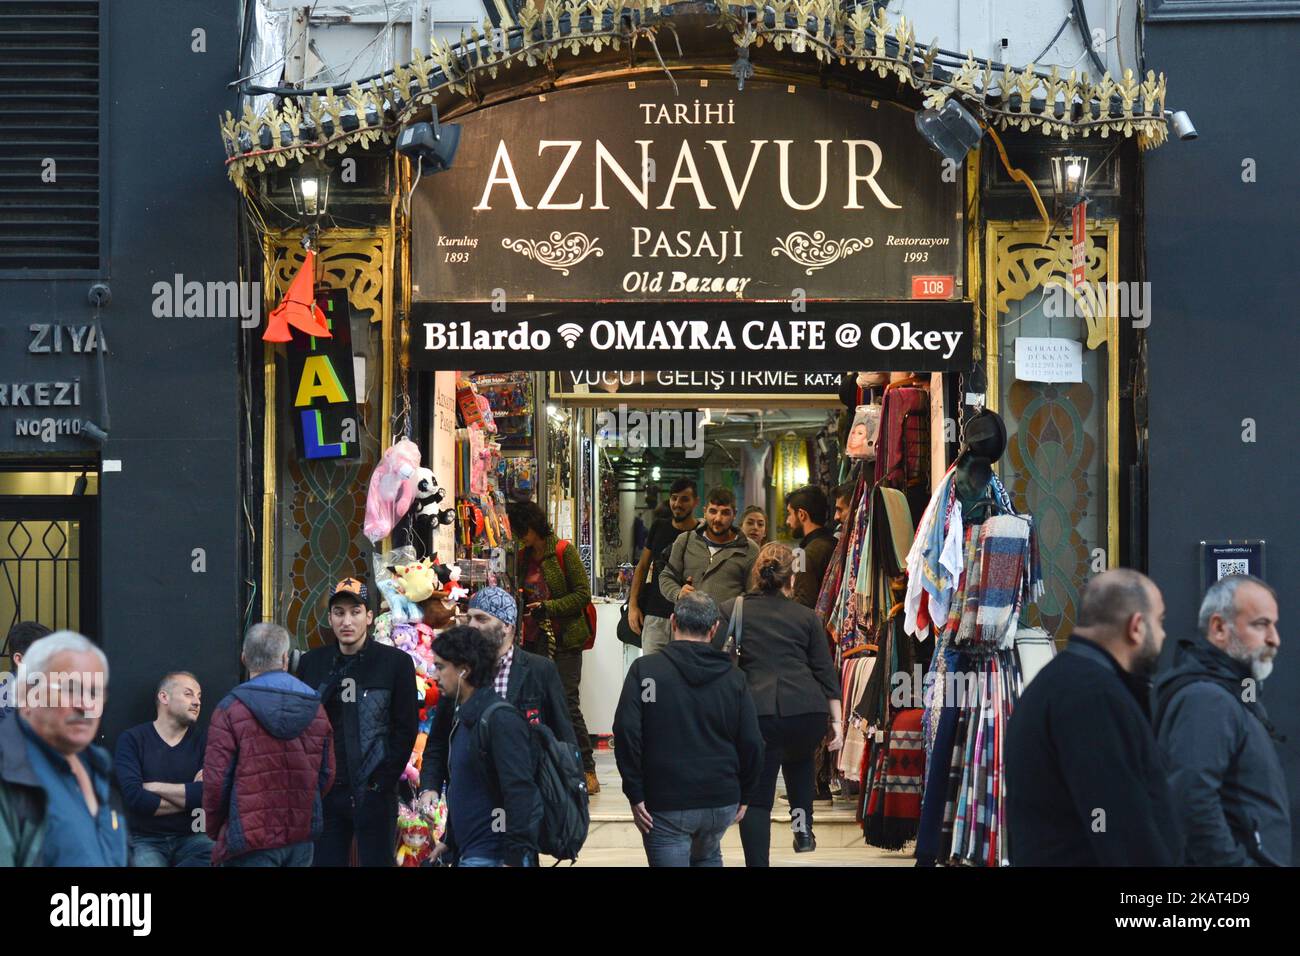 A view of the entrance to Tarihi Aznavur Pasaji on ?stiklal Street in Beyoglu district of Istanbul. On Tuesday, 17 October 2017, in Istanbul, Turkey. (Photo by Artur Widak/NurPhoto)  Stock Photo